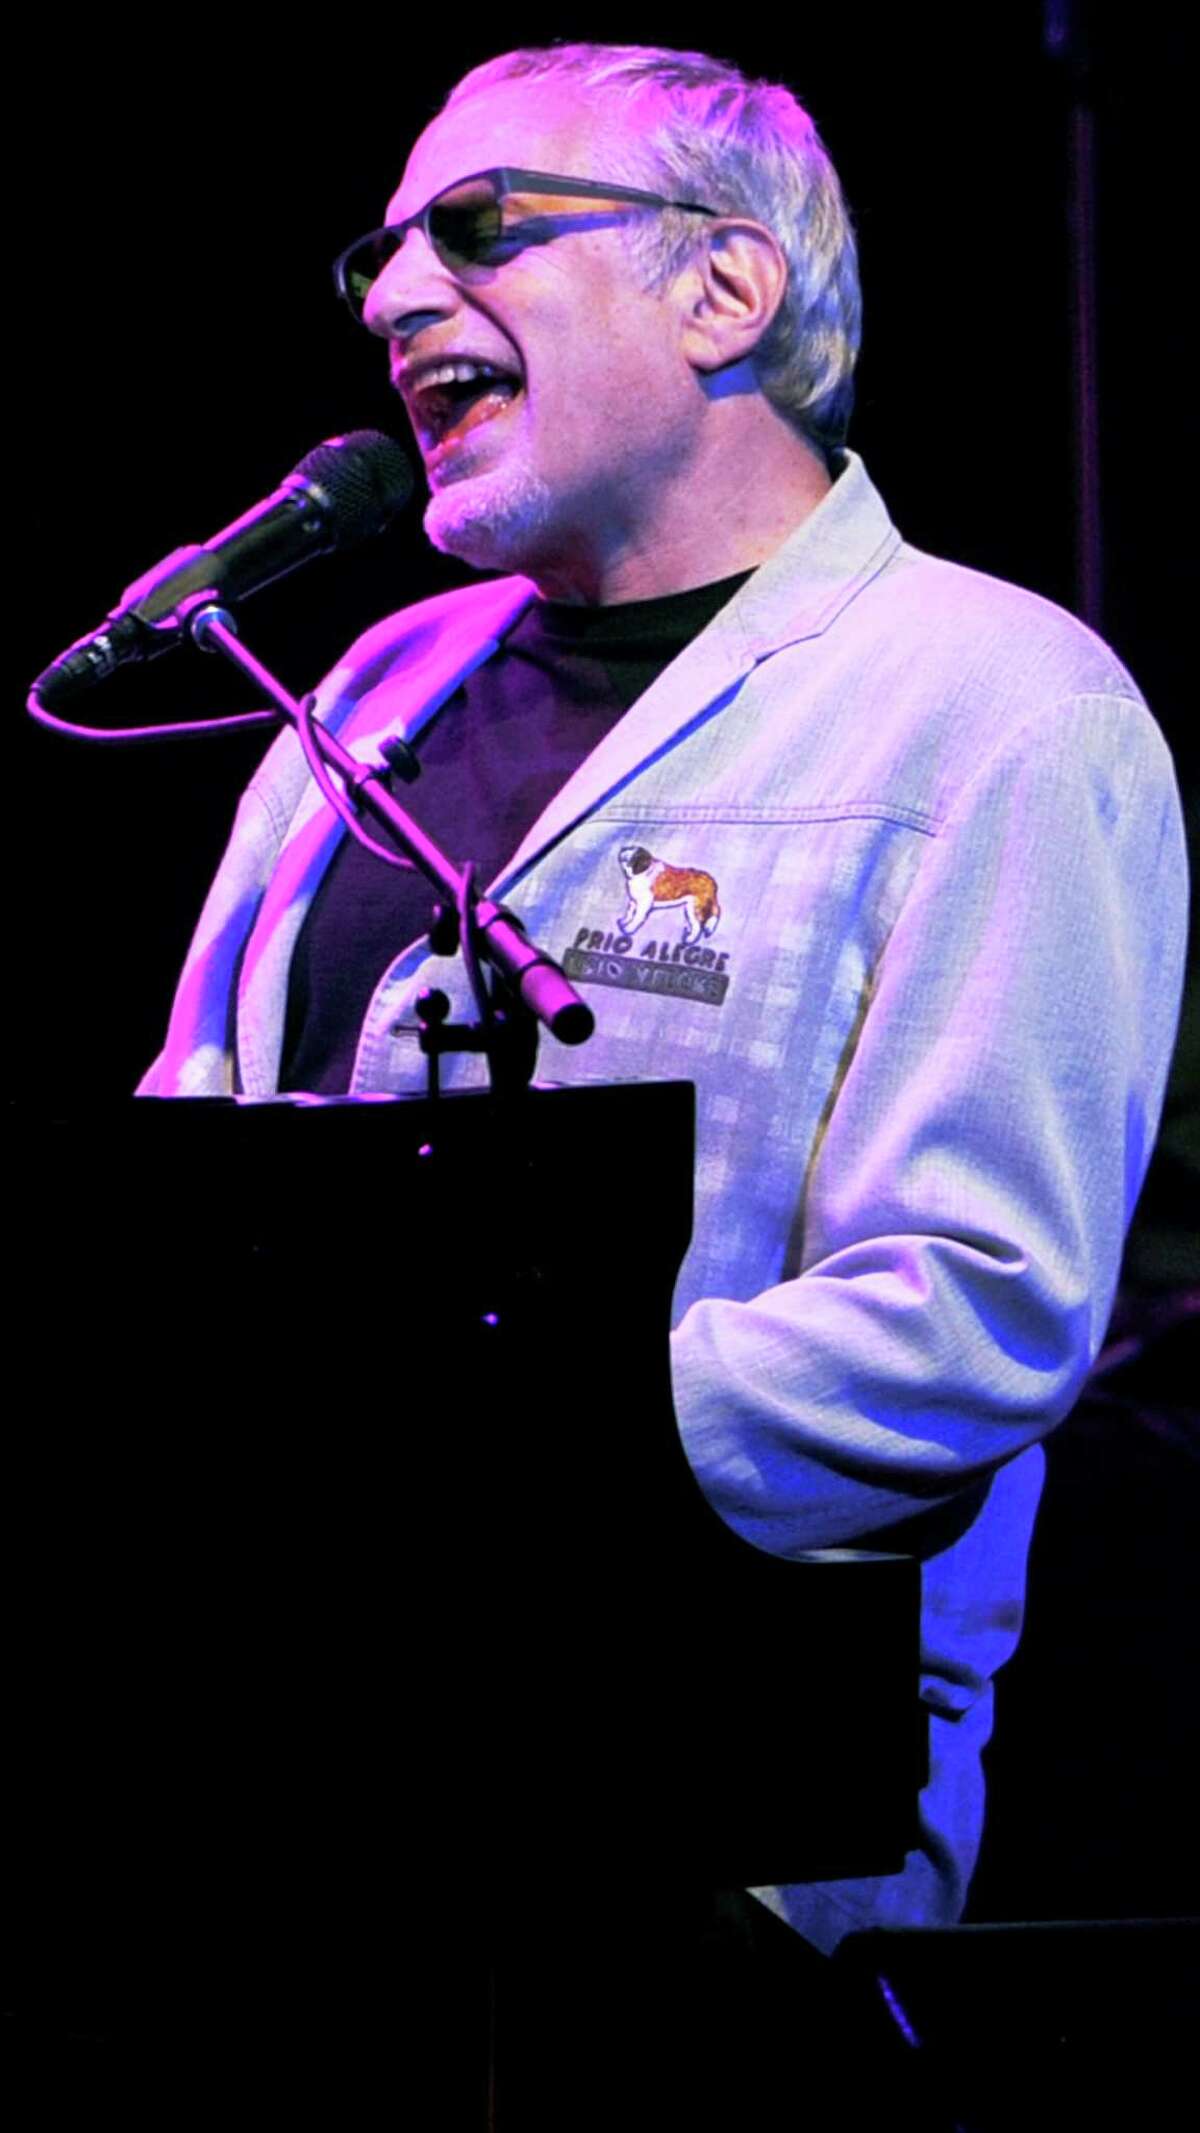 Donald Fagen of The Dukes of September Rhythm Revue perform at the Gibson Amphitheatre on June 28, 2012 in Universal City, California.